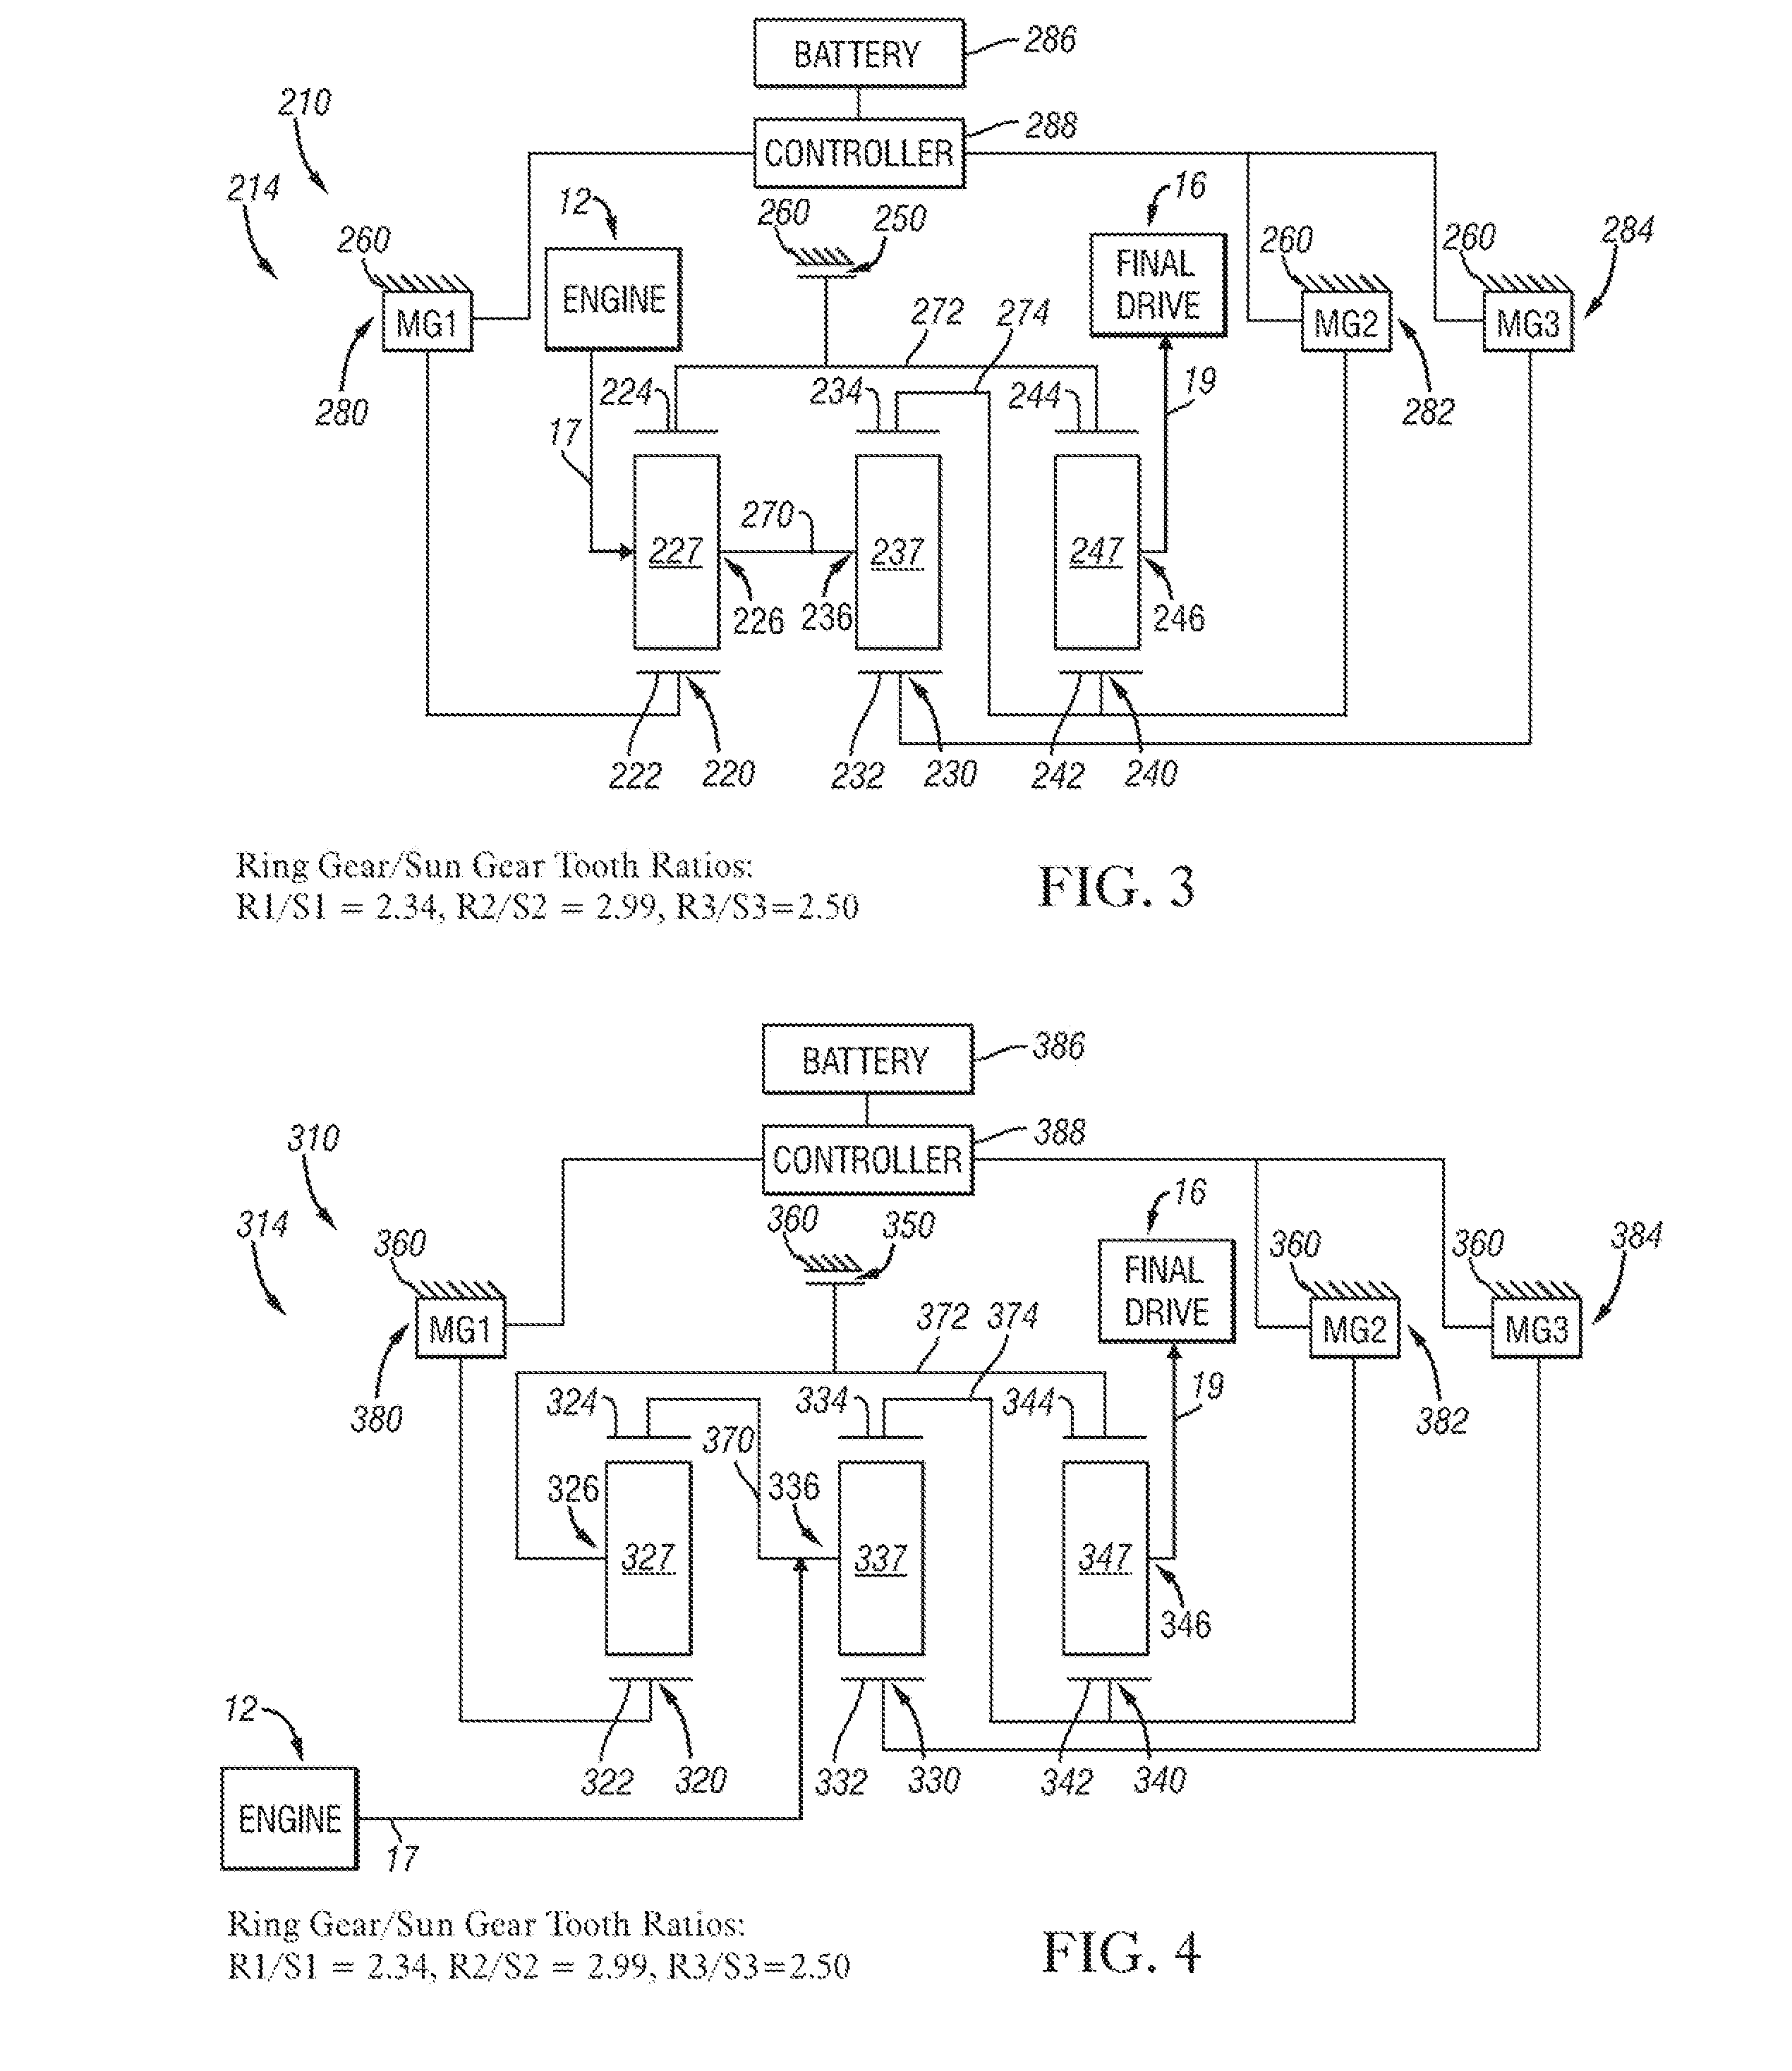 Hybrid architecture incorporating three interconnected gear sets and brakes